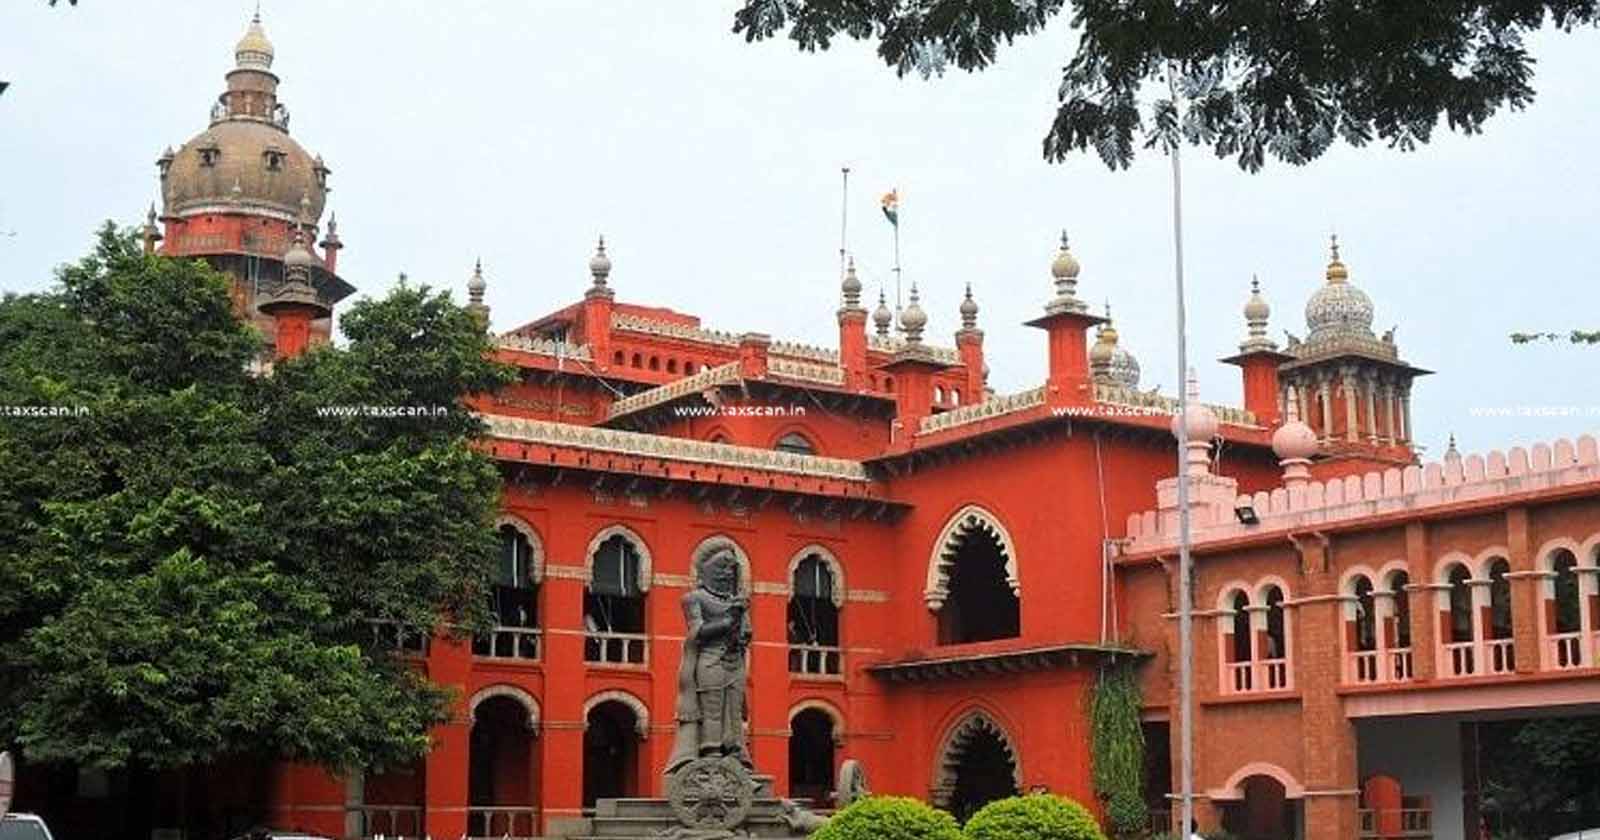 SCN - GST Demand Order - Madras HC sets aside Order, directs - Initiate Proceedings - accordance with Law - taxascan